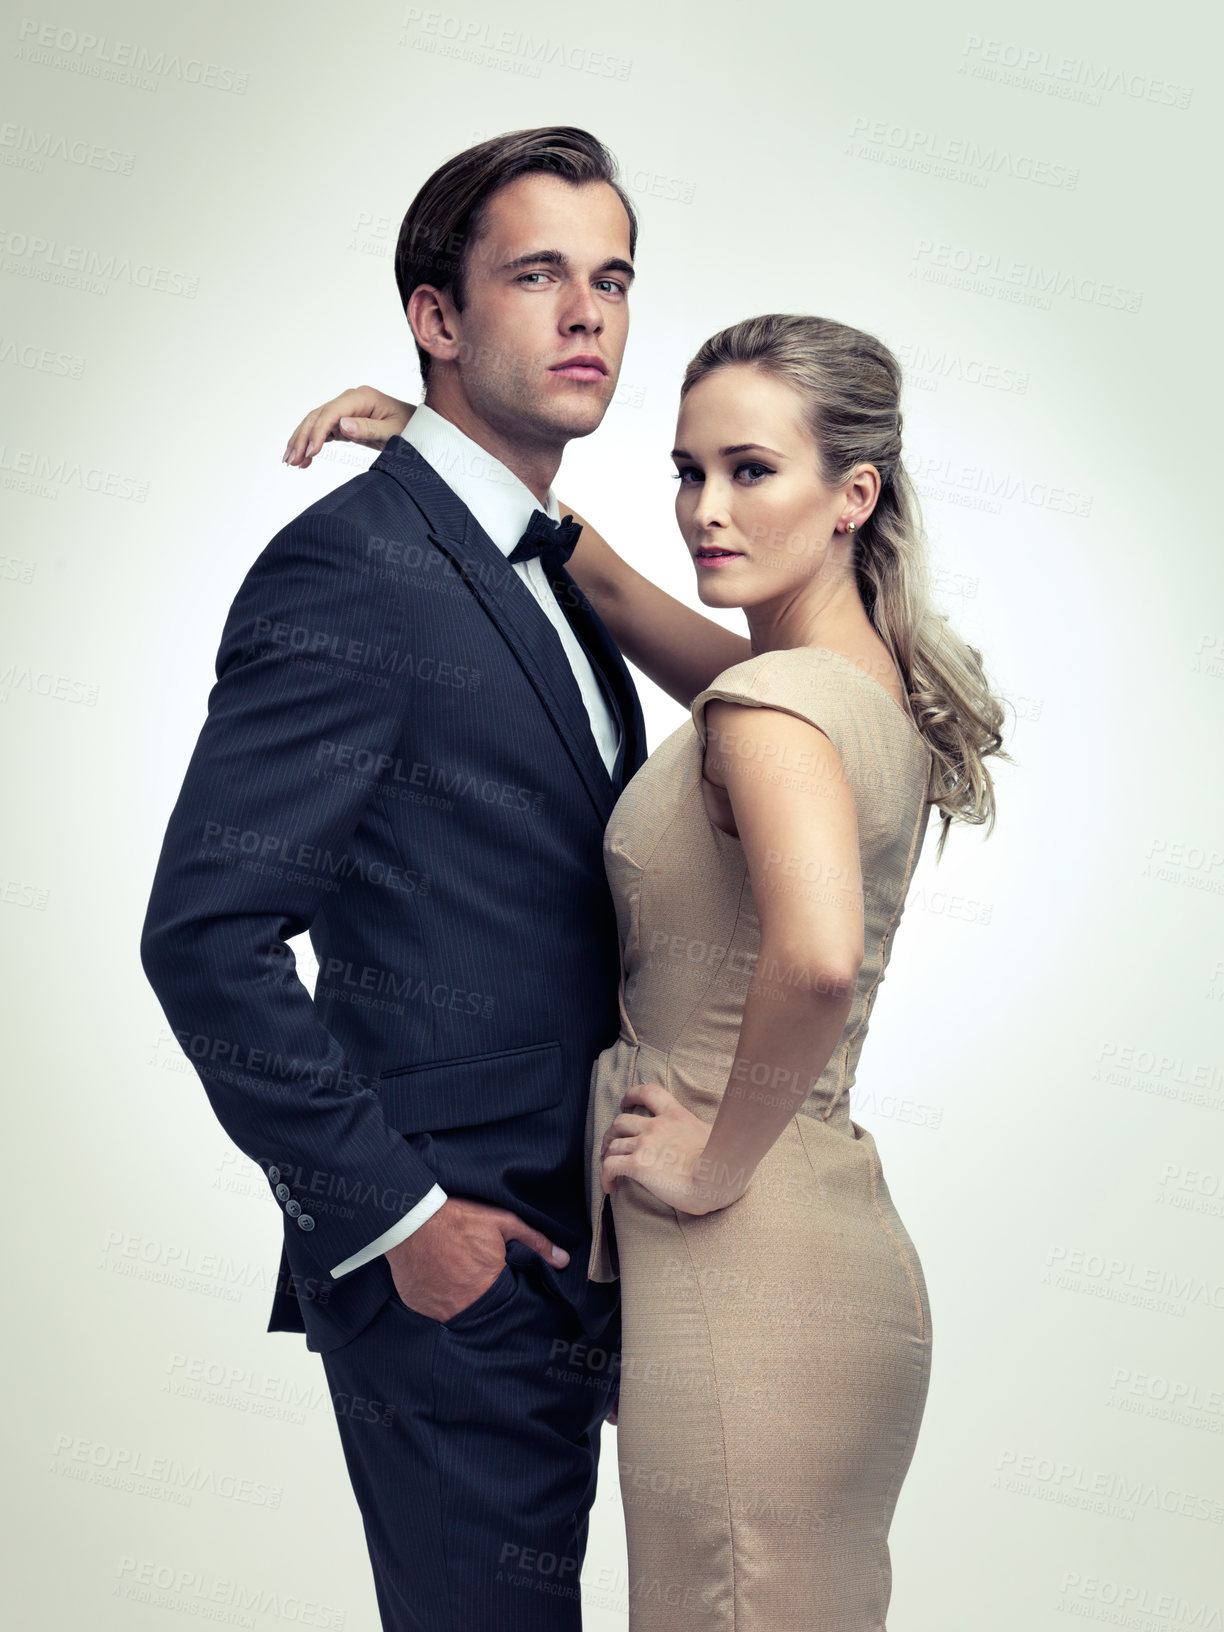 Buy stock photo A studio portrait of a couple in stylish vintage evening wear